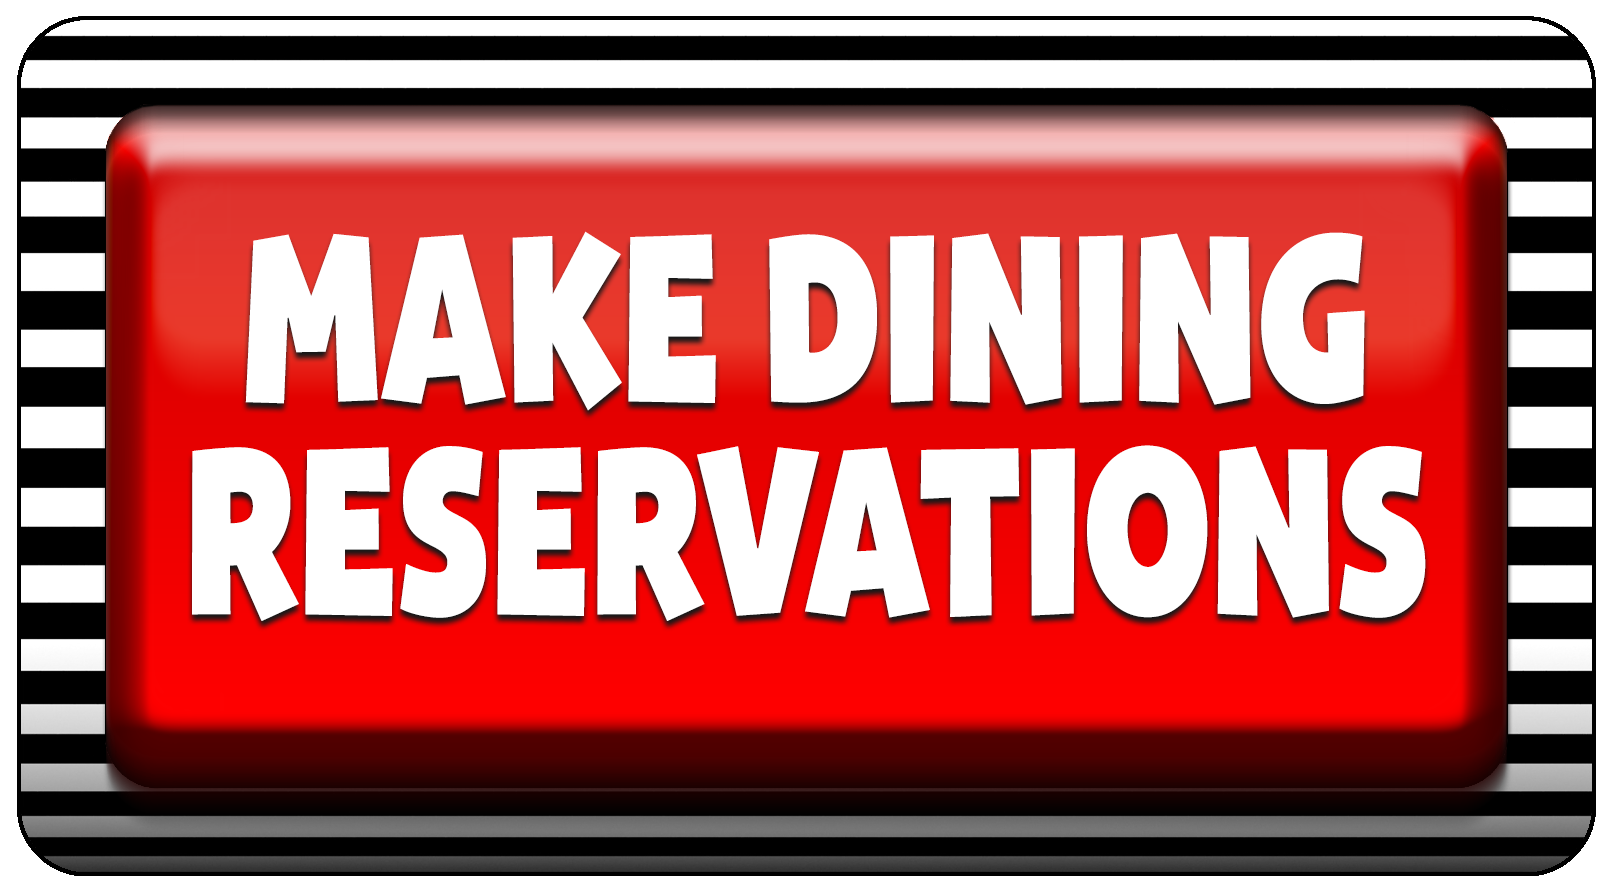 Link to make reservations now